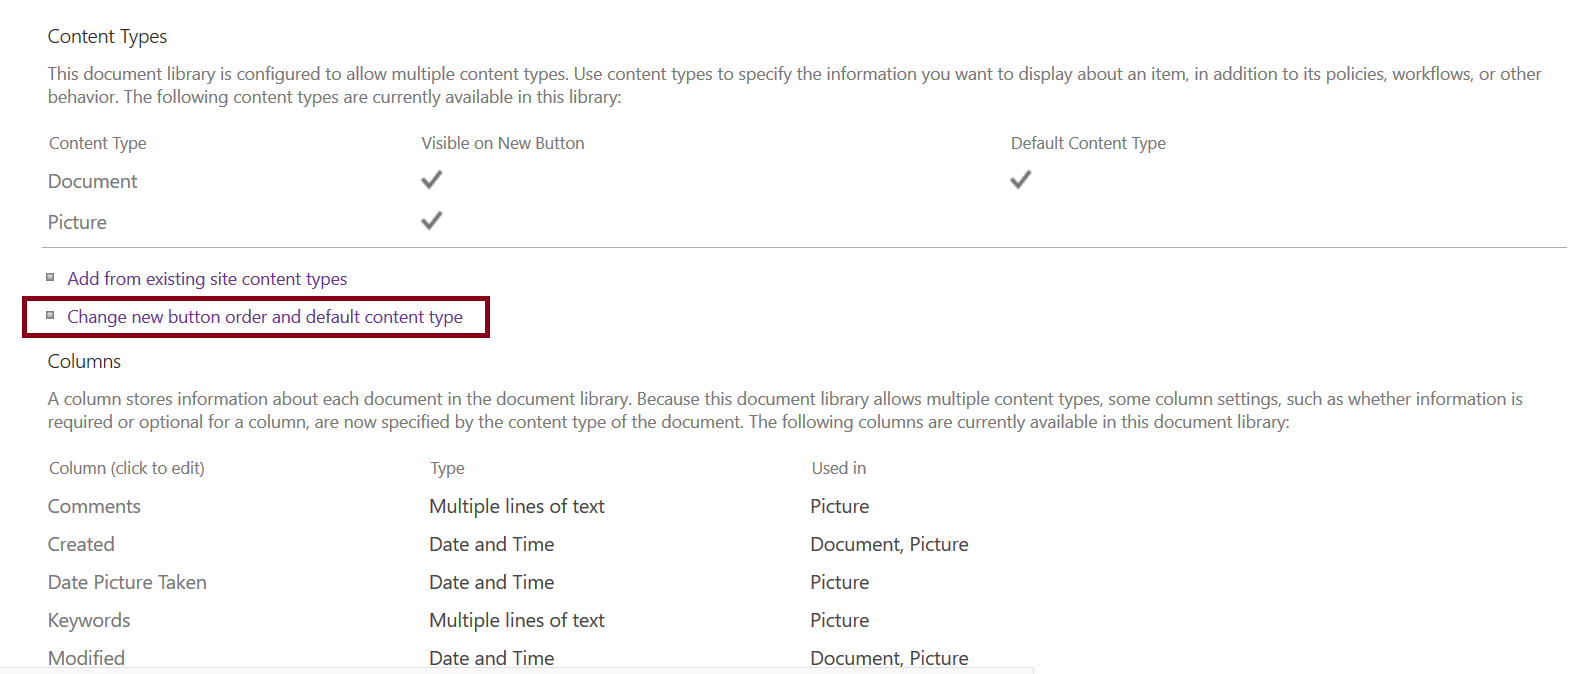 Change new button order and default content type - document library settings, add picture library to communication site